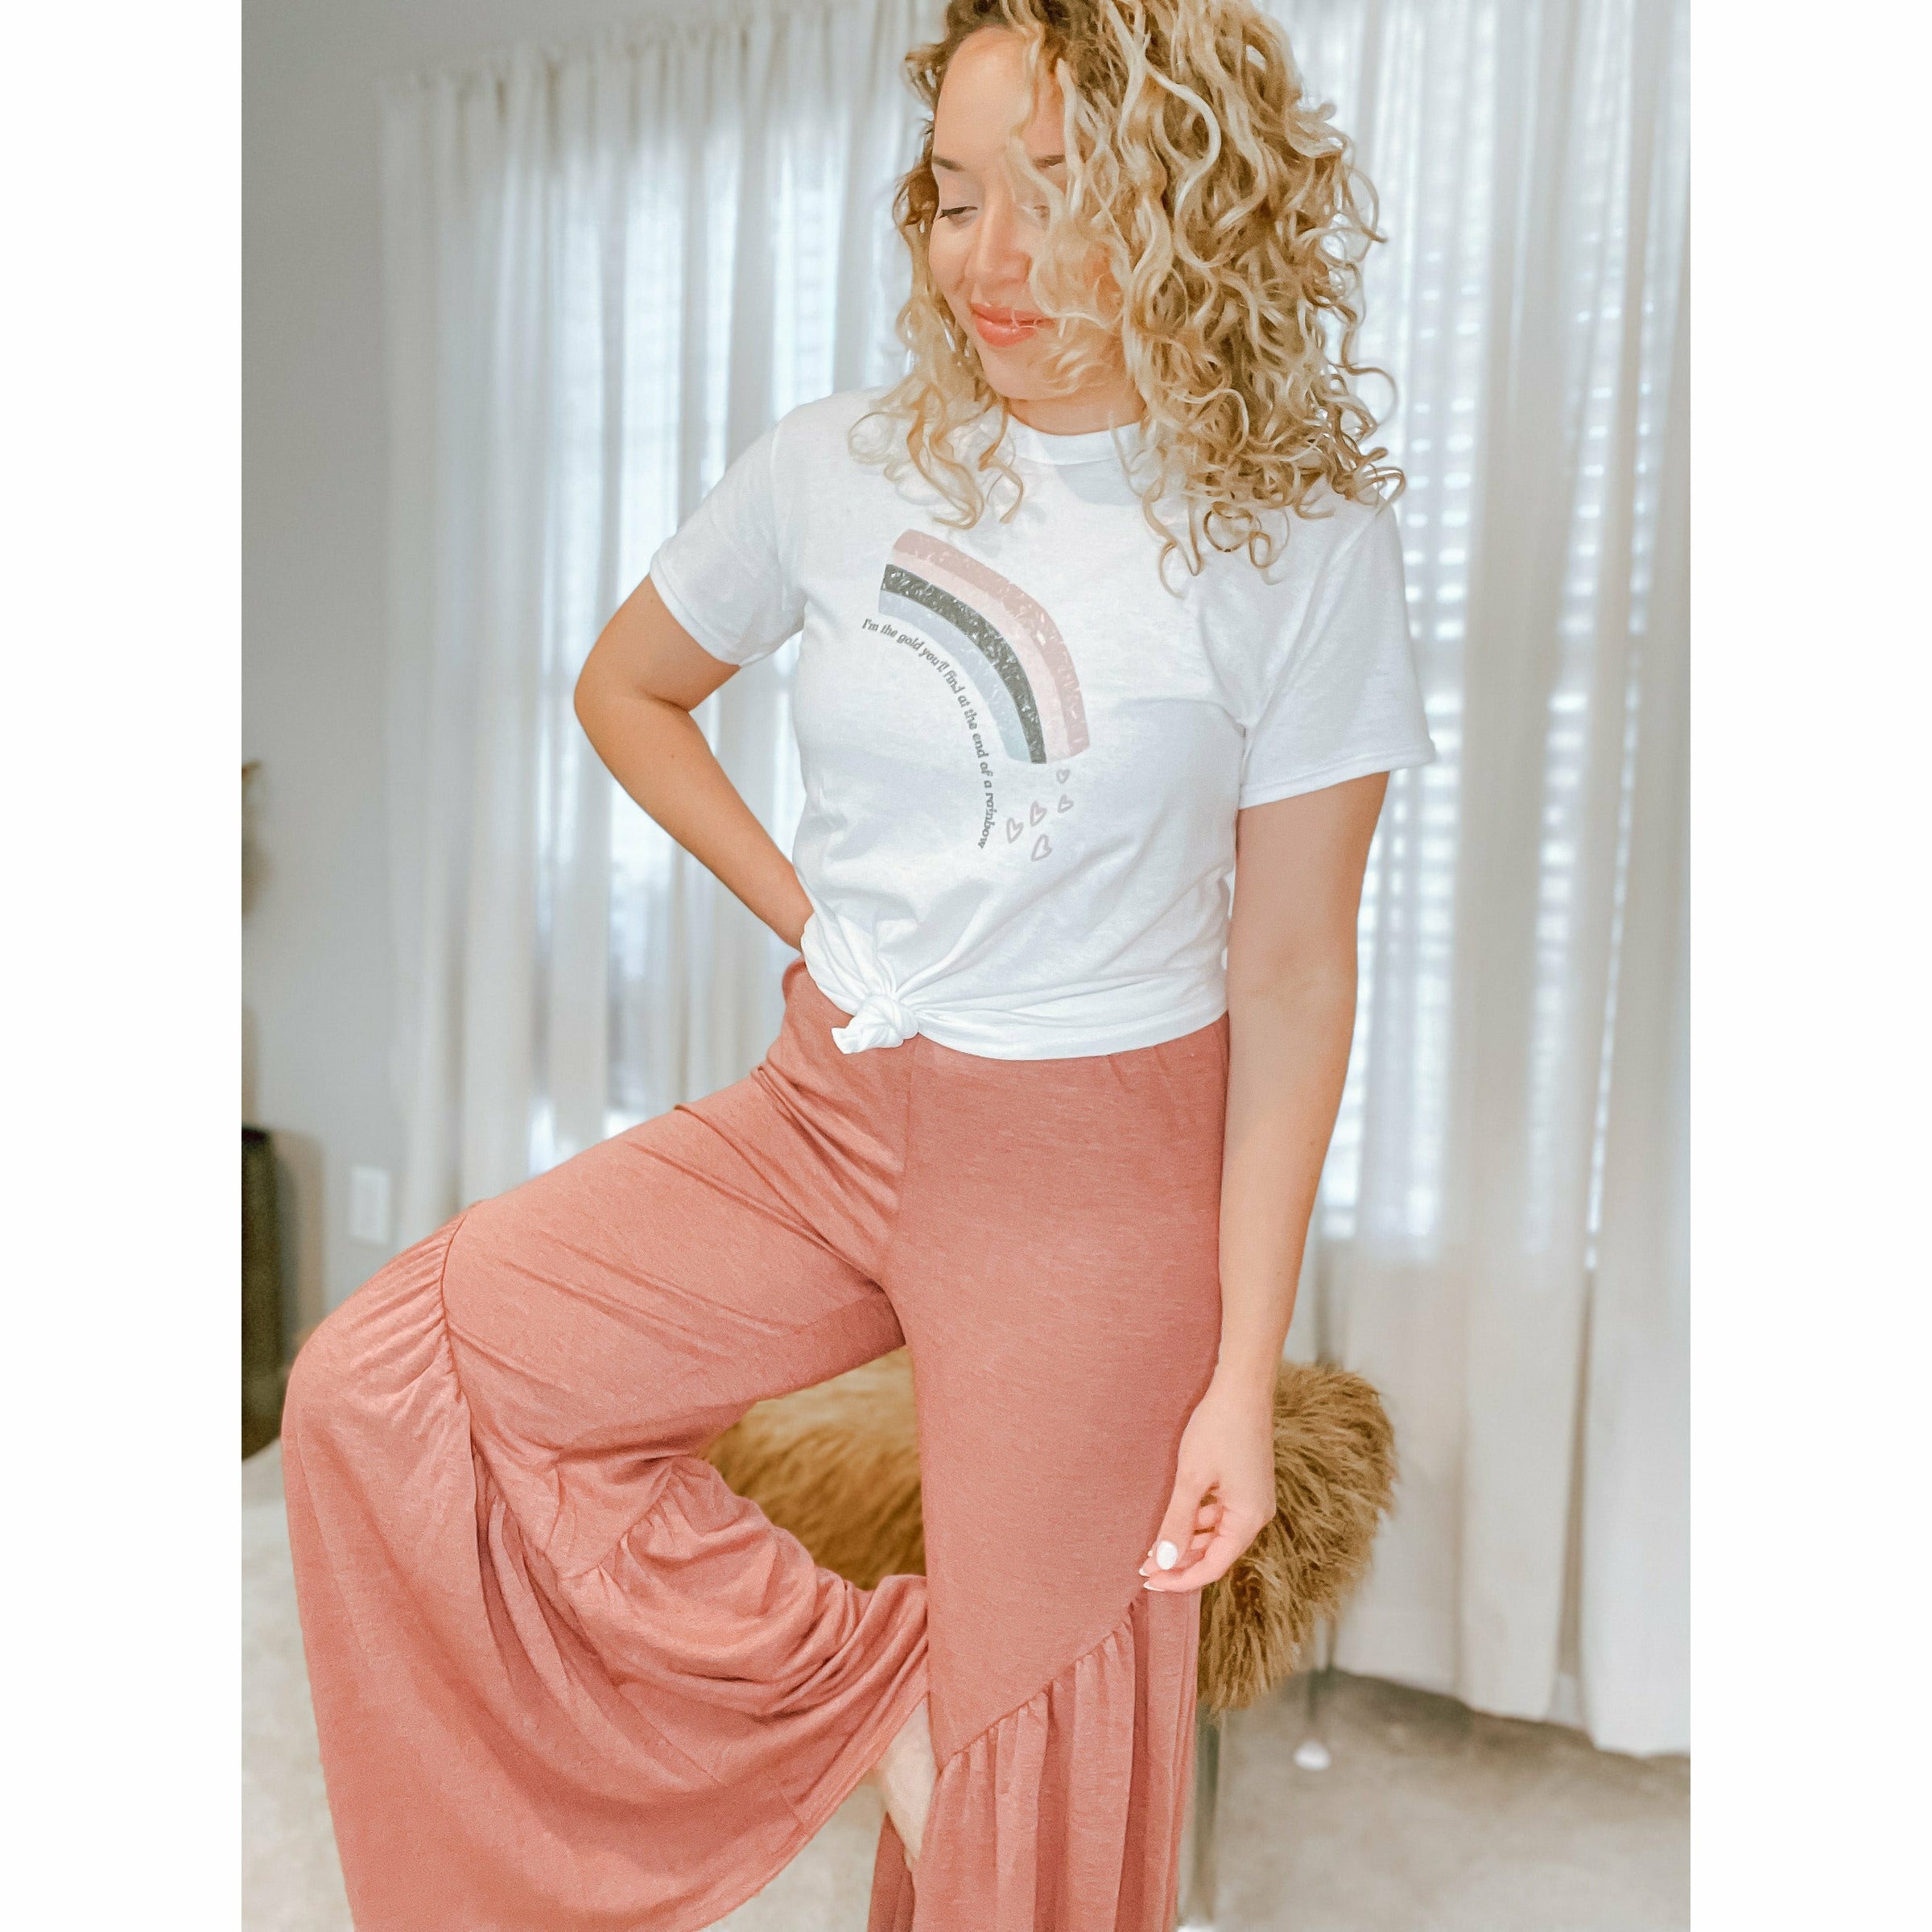 Kelly Palazzo Pants - The Hive by Chris Jesselle